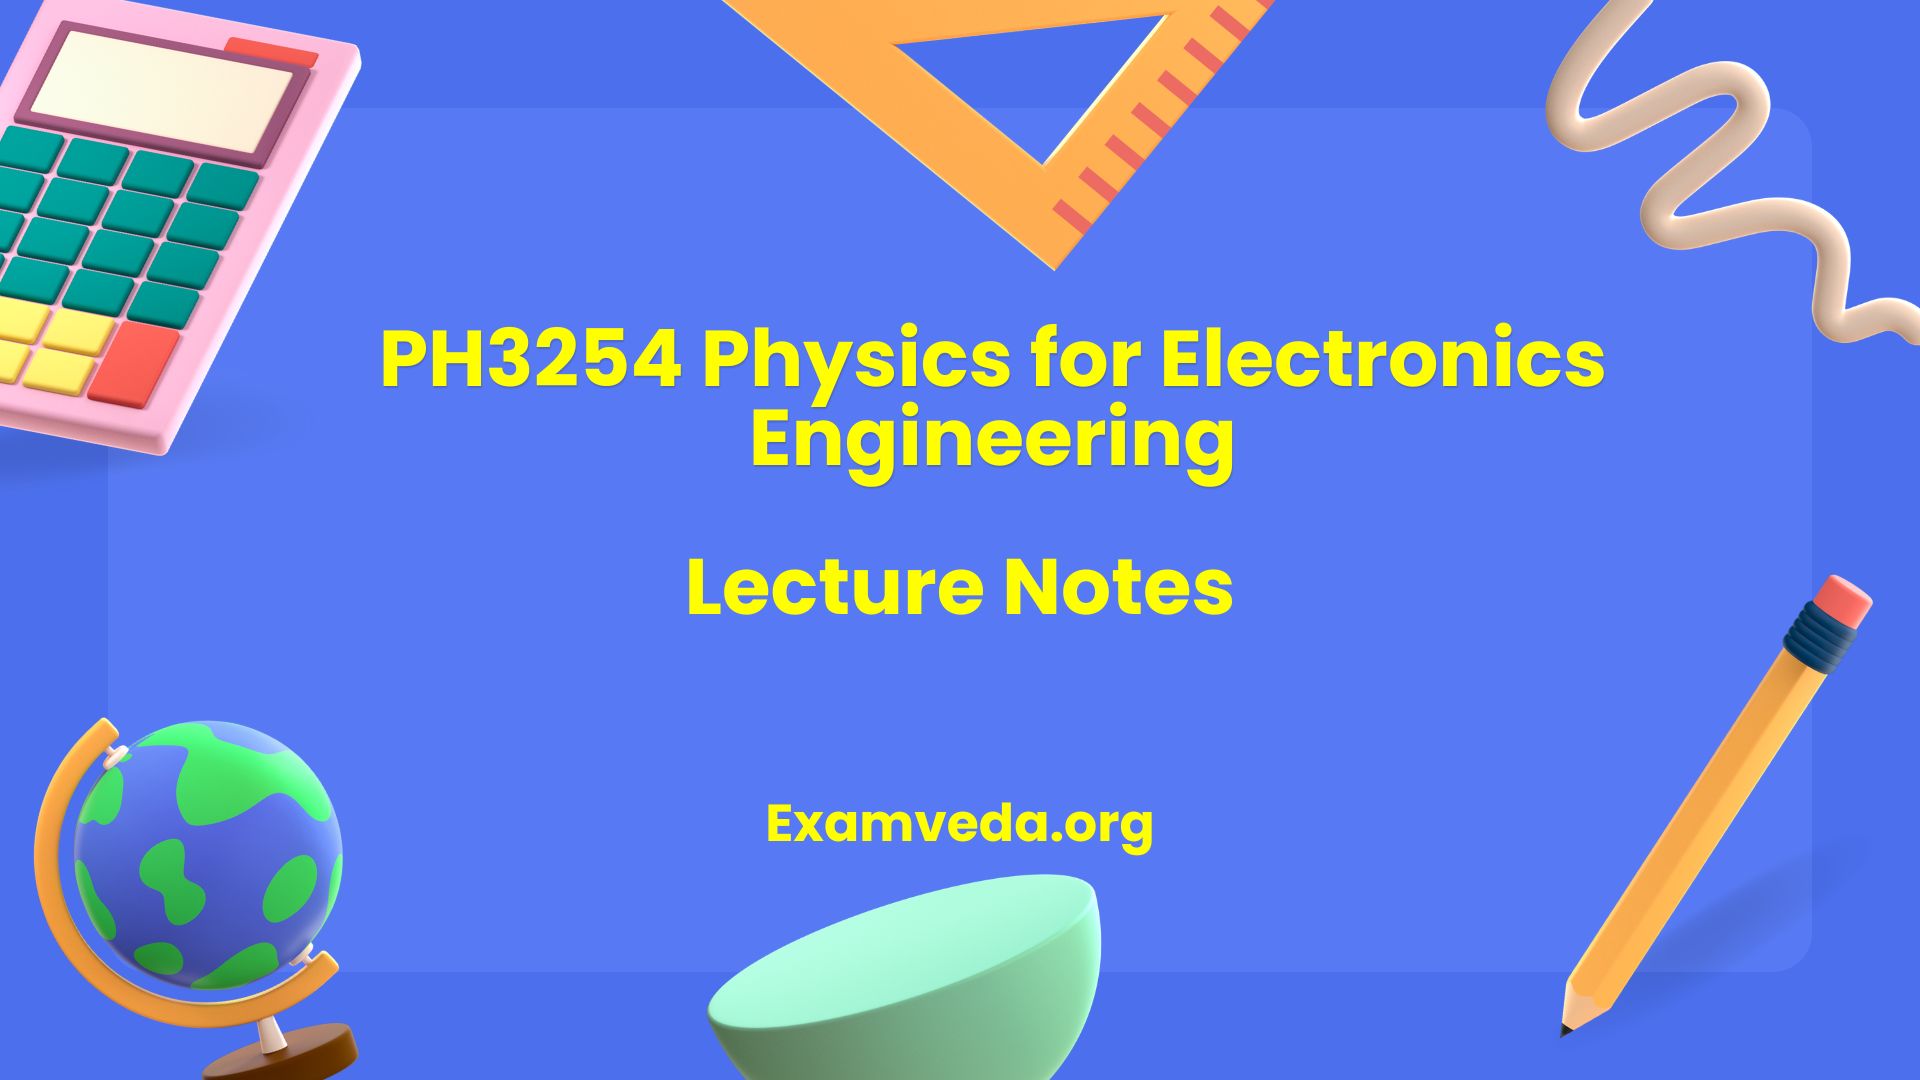 PH3254 Physics for Electronics Engineering Lecture Notes